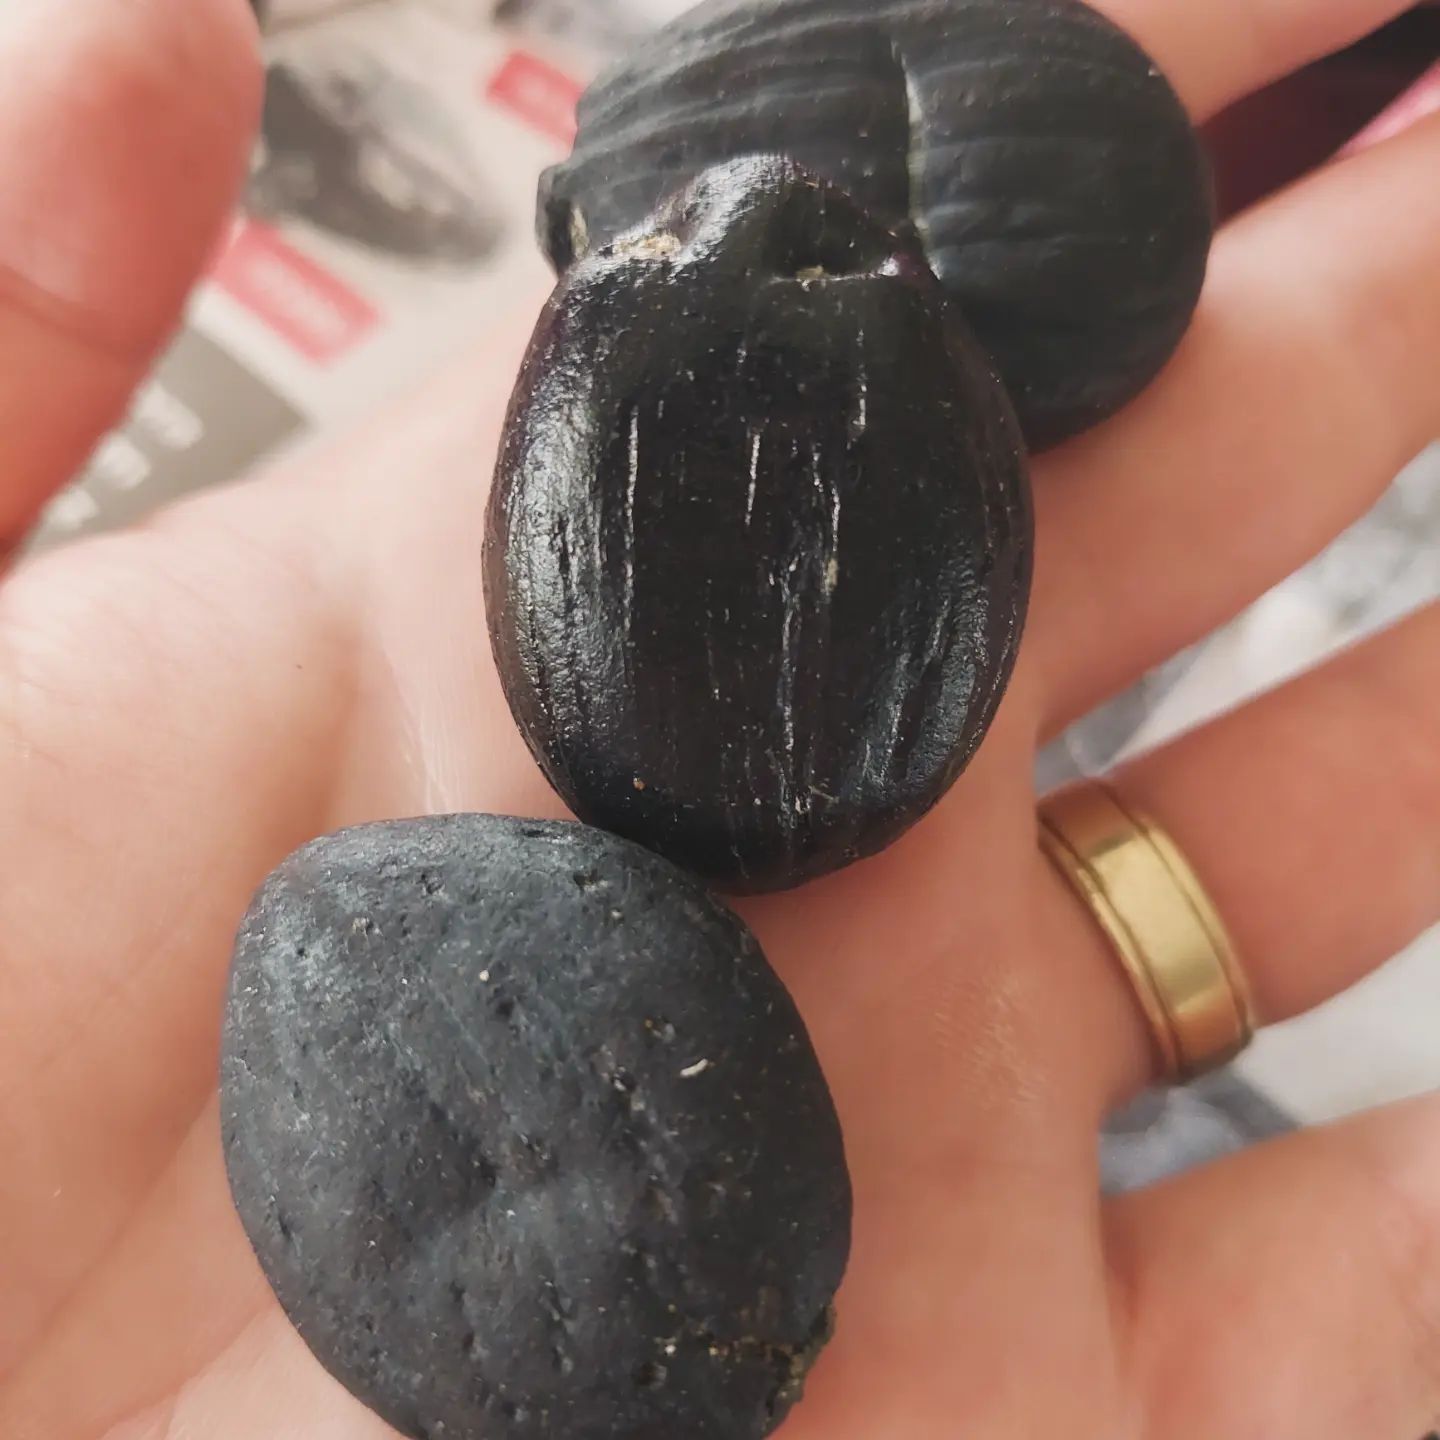 Some beautiful fossil coconuts from Nortland in New Zealand, they are roughly 15 million years old. They are Cocos zeylandica and show New Zealand used to be quite a bit warmer. I visited a fellow fossil hunter and she kindly gave me these, I'll have to go find some myself one day   

The scientific info is from the GNS website